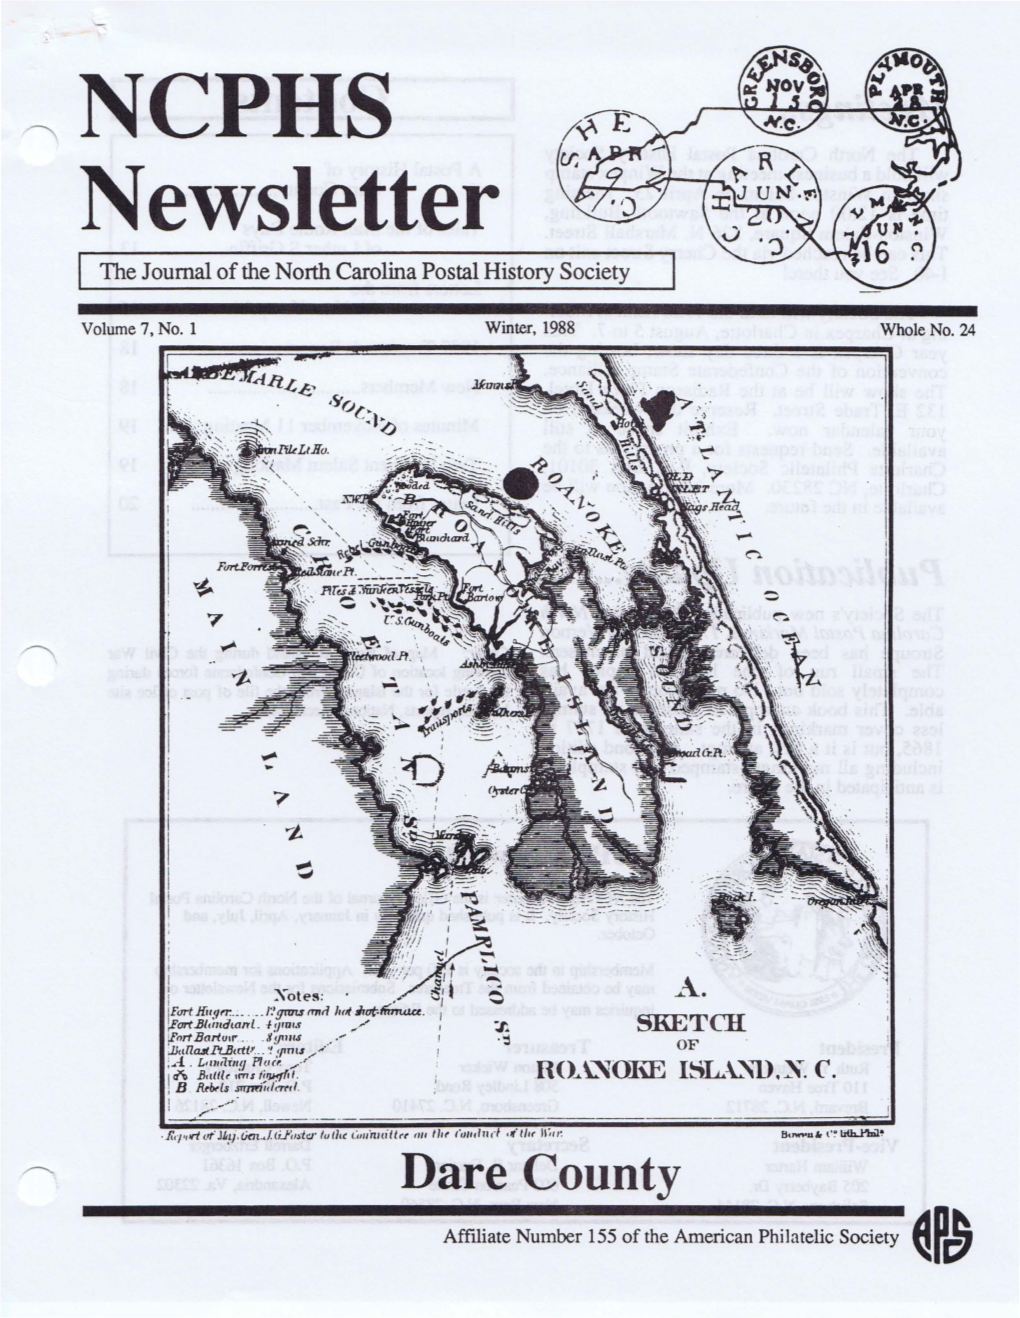 NCPHS Newsletter the Journal of the North Carolina Postal History Society